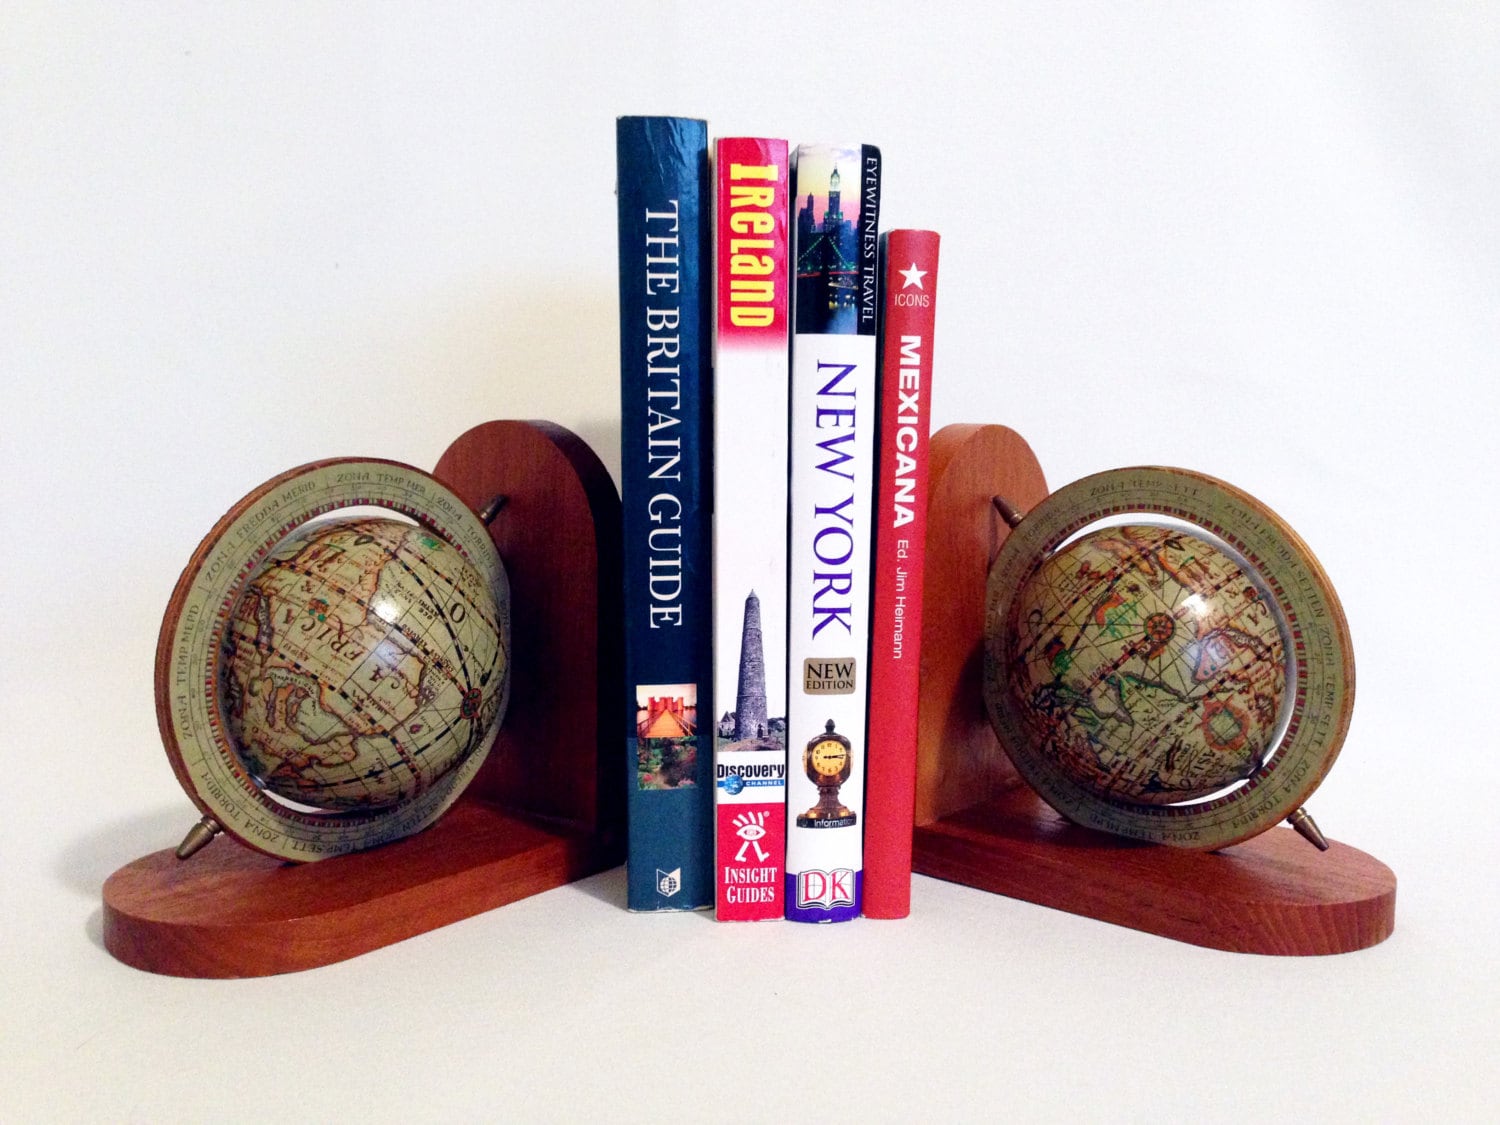 old world globe bookends